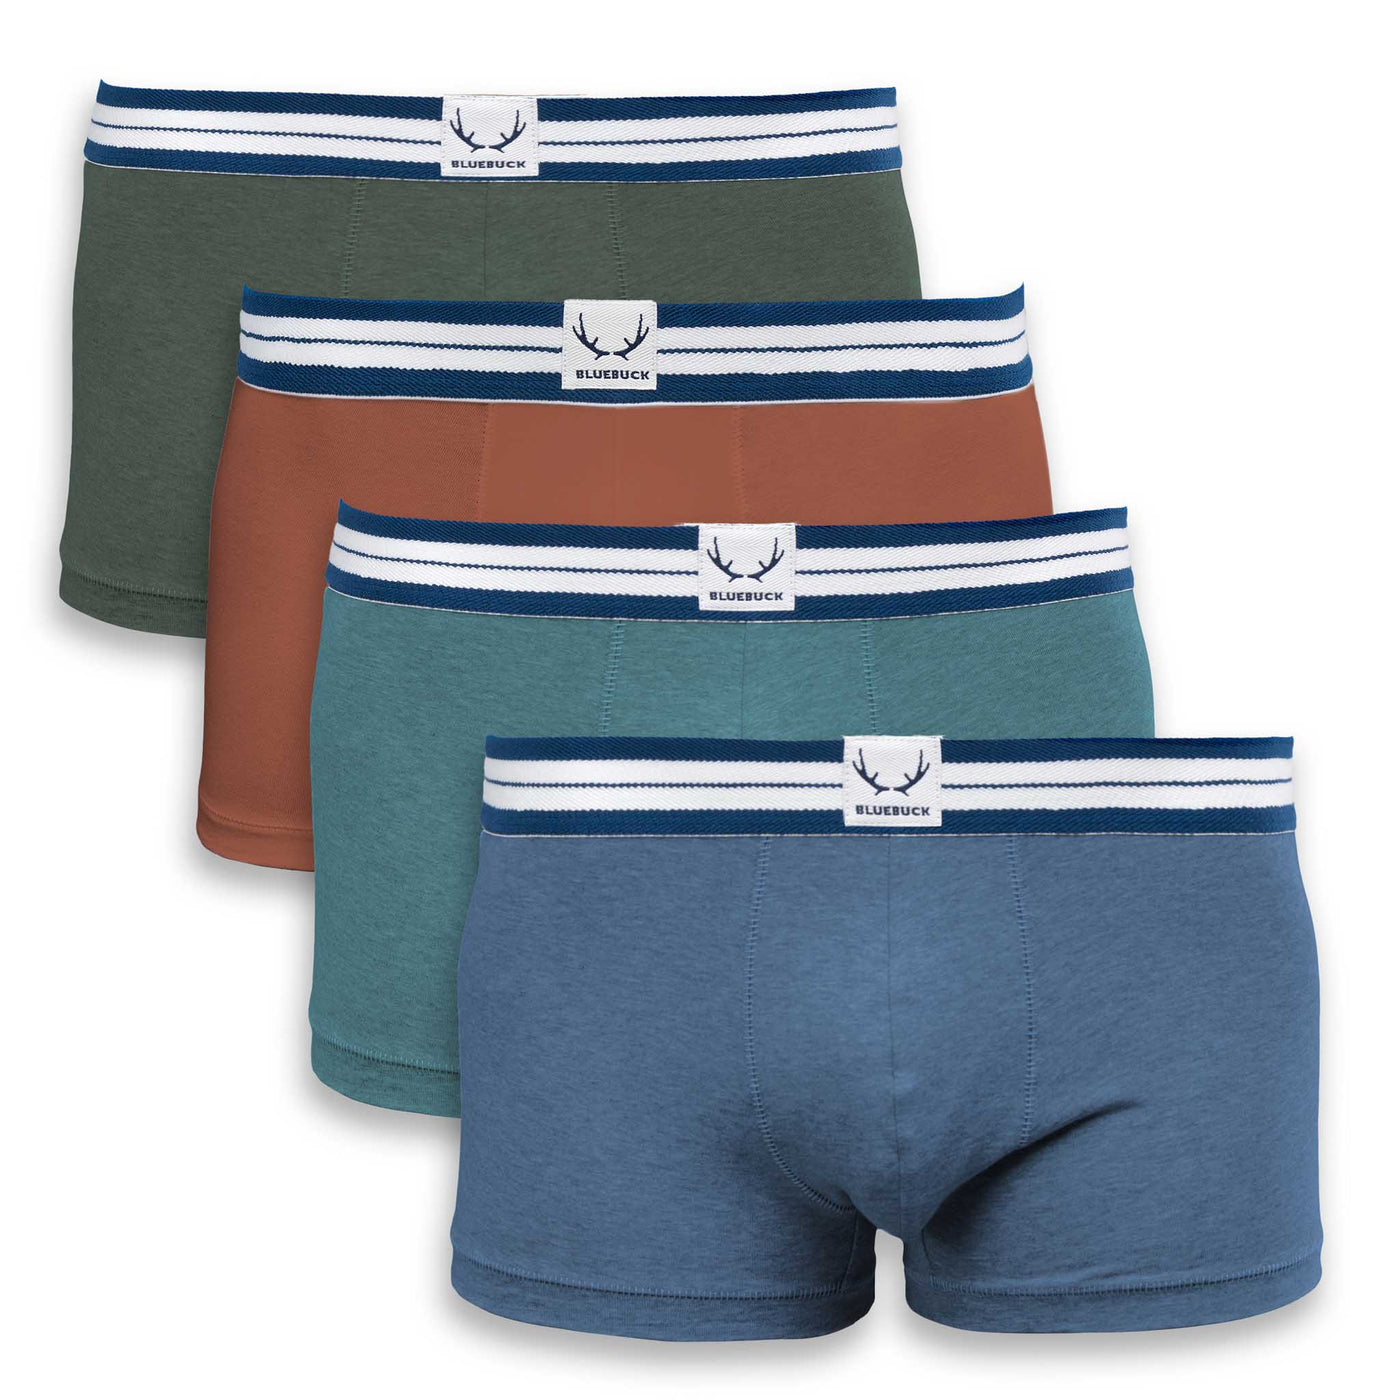 4 organic cotton trunks for men in green, brick, and blue